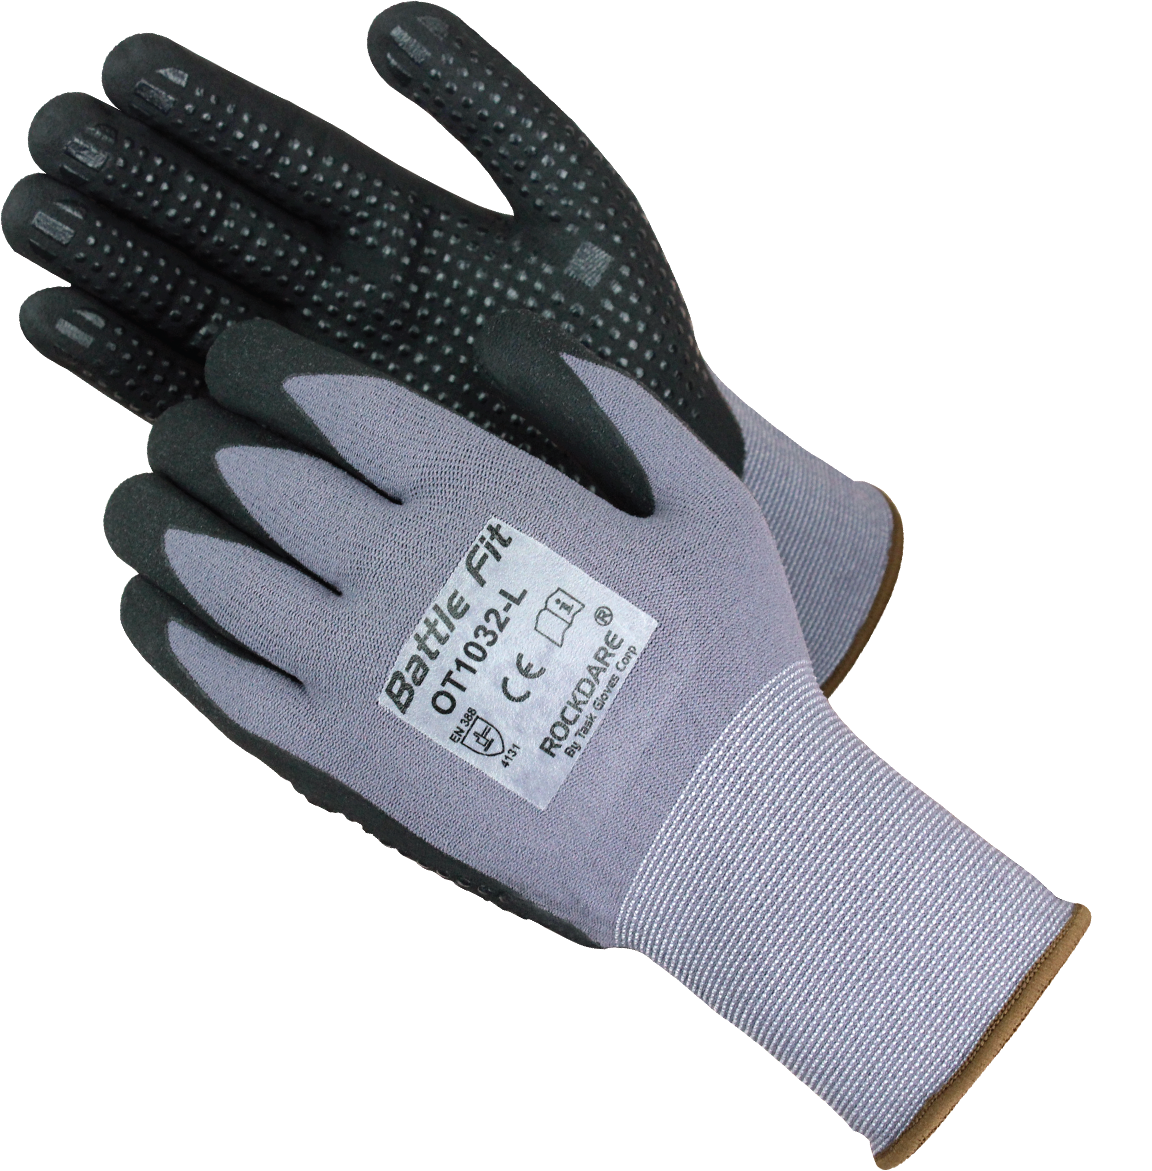 Task Gloves-Black Micro-Foam Nitrile Palm Coated with Nitrile Dots 15G Knit Gloves-eSafety Supplies, Inc